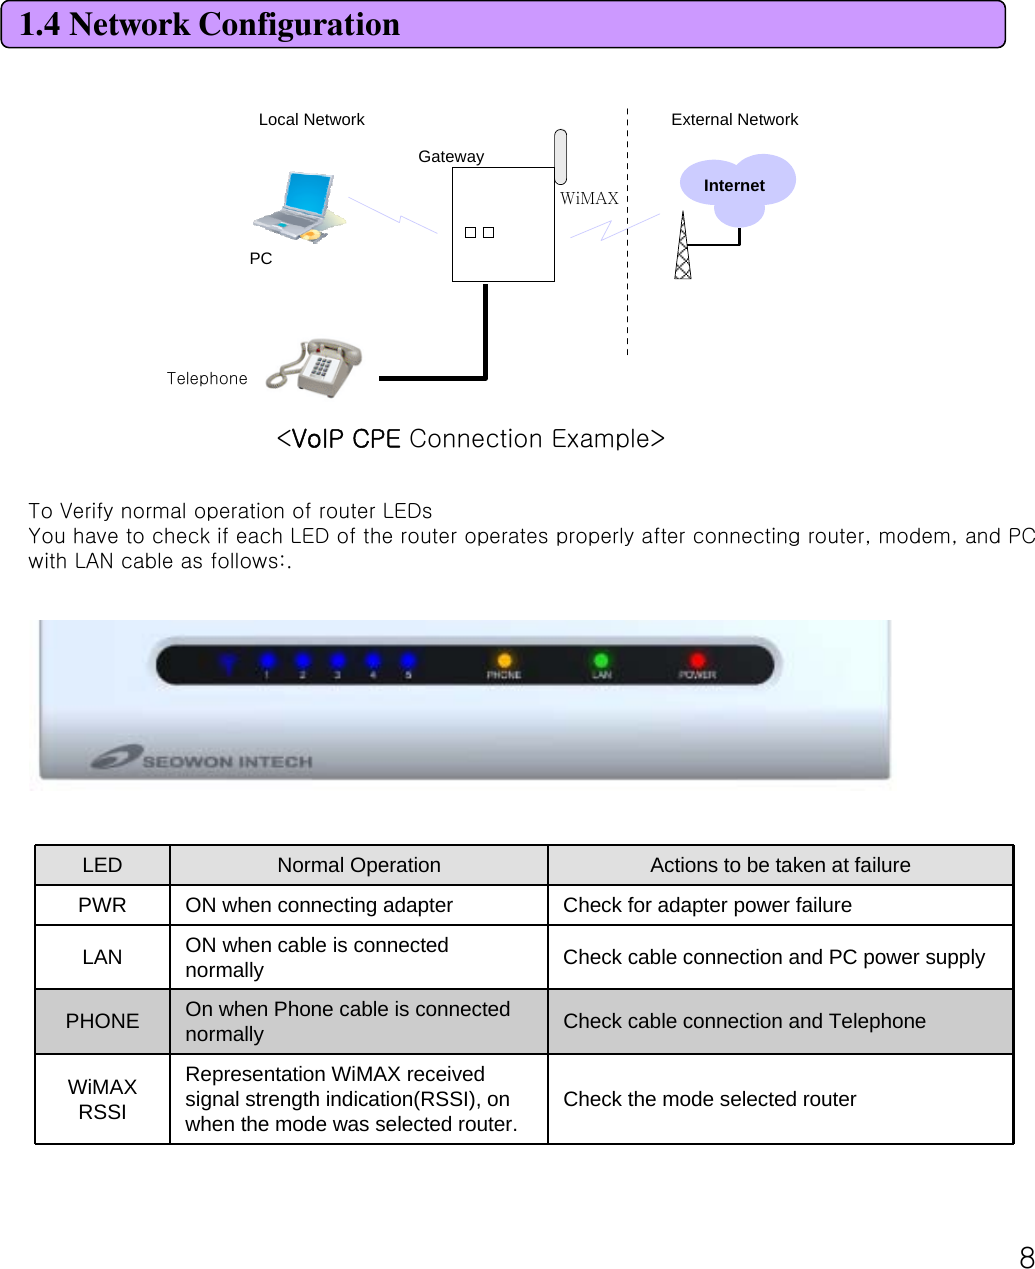 81.4 Network ConfigurationPCGateway InternetLocal Network External NetworkWiMAX&lt;VoIP CPE Connection Example&gt; LED Normal Operation Actions to be taken at failurePWR  ON when connecting adapter Check for adapter power failureLAN  ON when cable is connected normally Check cable connection and PC power supplyPHONE On when Phone cable is connected normally  Check cable connection and TelephoneWiMAXRSSI Representation WiMAX received signal strength indication(RSSI), on when the mode was selected router.  Check the mode selected routerSEOWONINTECHTo Verify normal operation of router LEDsYou have to check if each LED of the router operates properly after connecting router, modem, and PC with LAN cable as follows:. Telephone